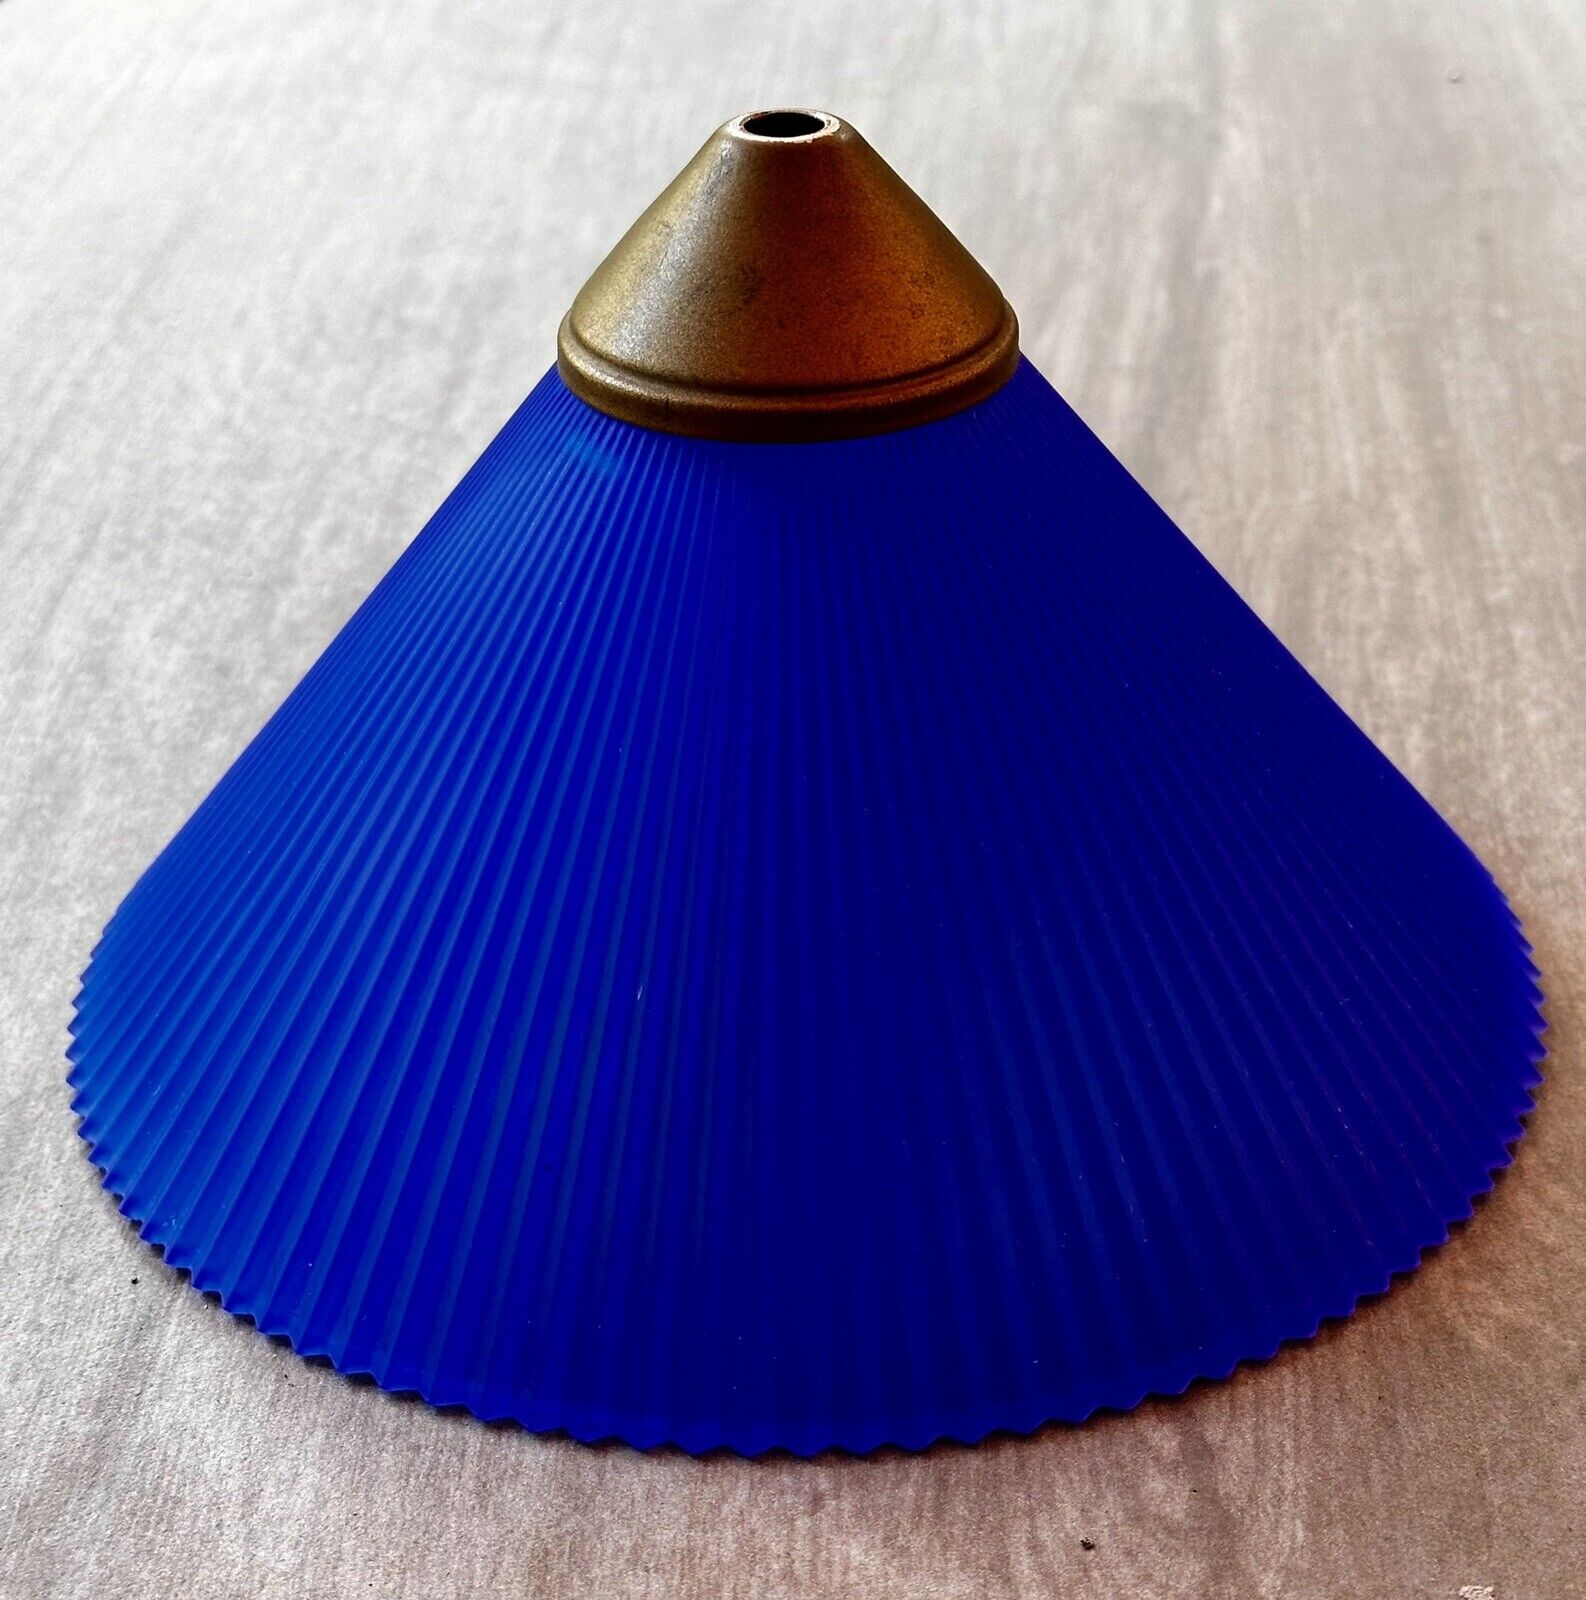 Rare And hard To find Art Deco FrostedCobalt Blue Lamp Shade